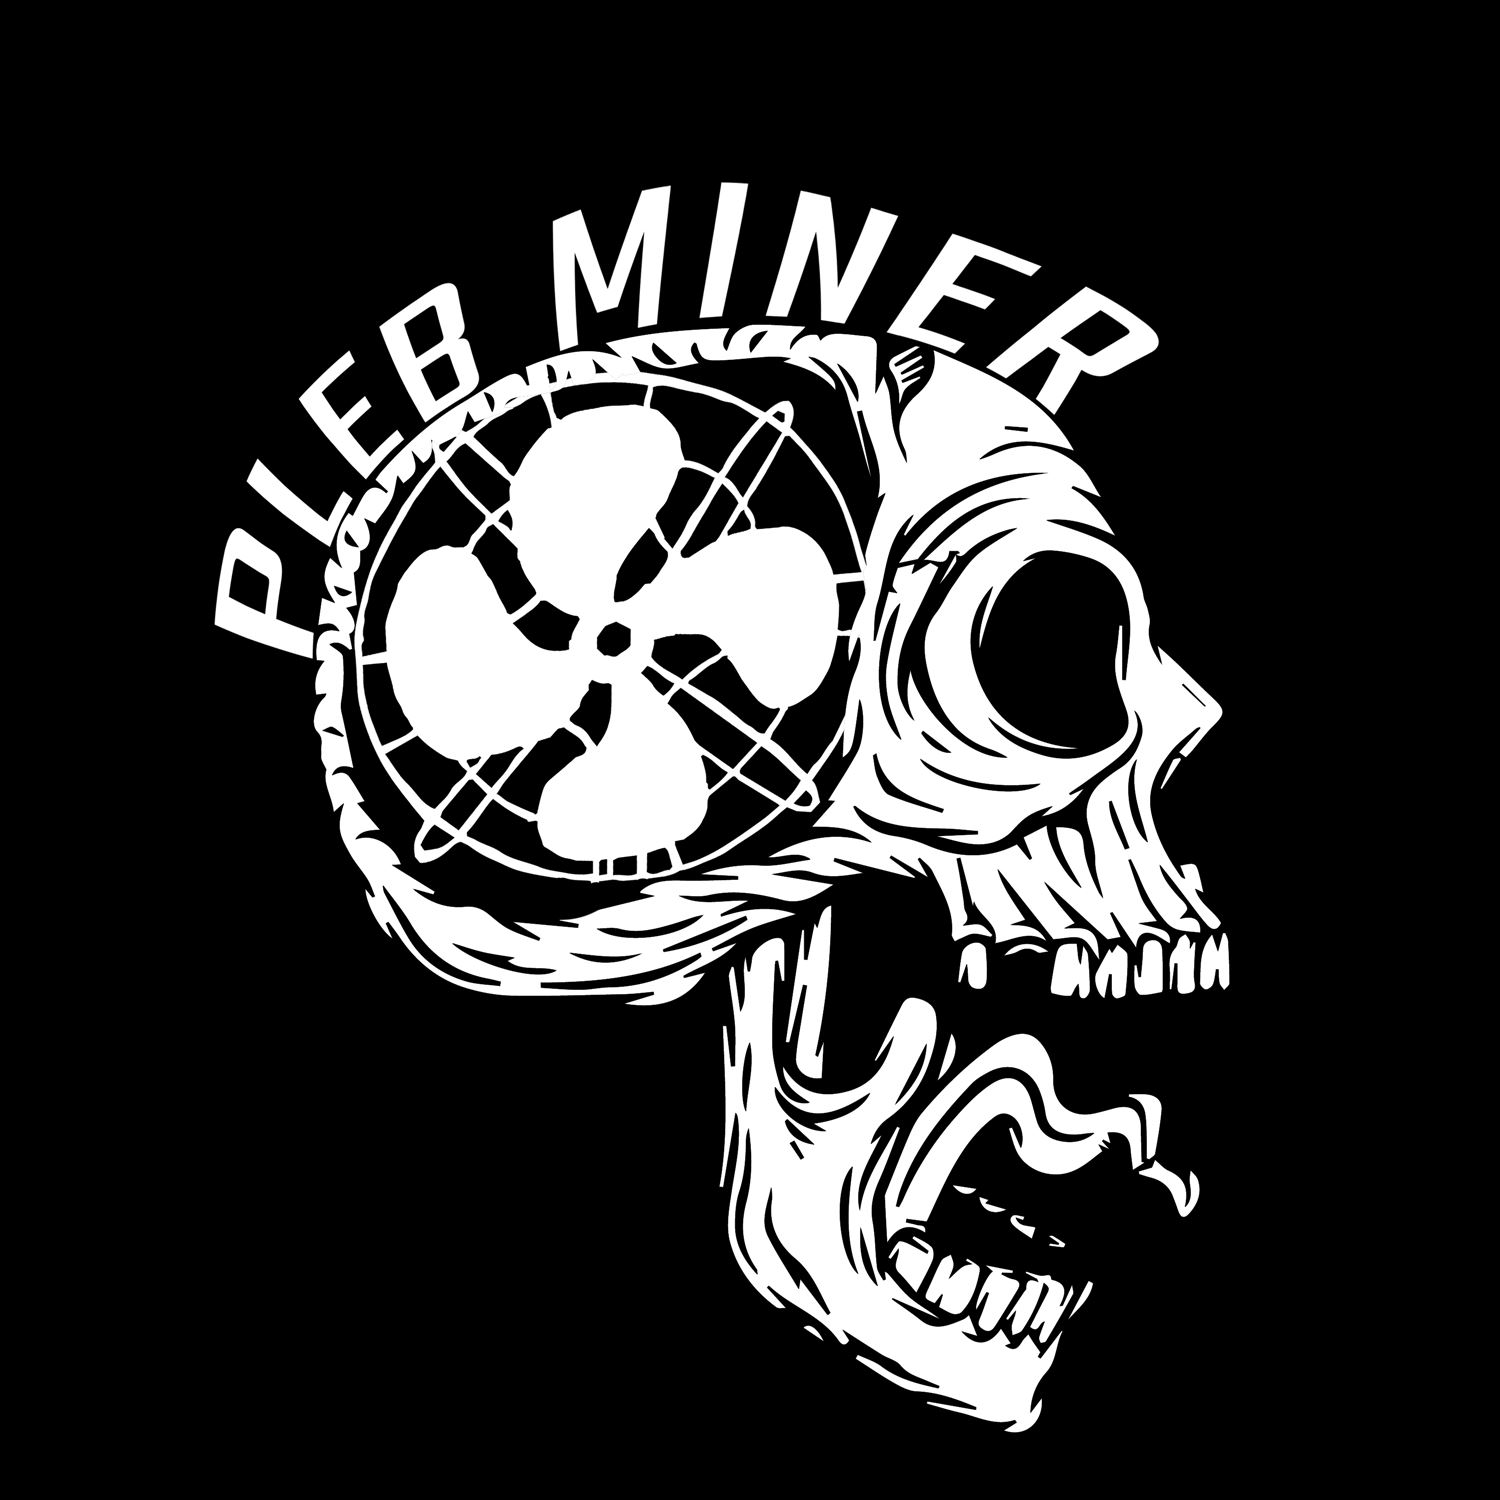 Pleb Miner Monthly EP12 - Don’t sell out! Bitcoin deserves better!